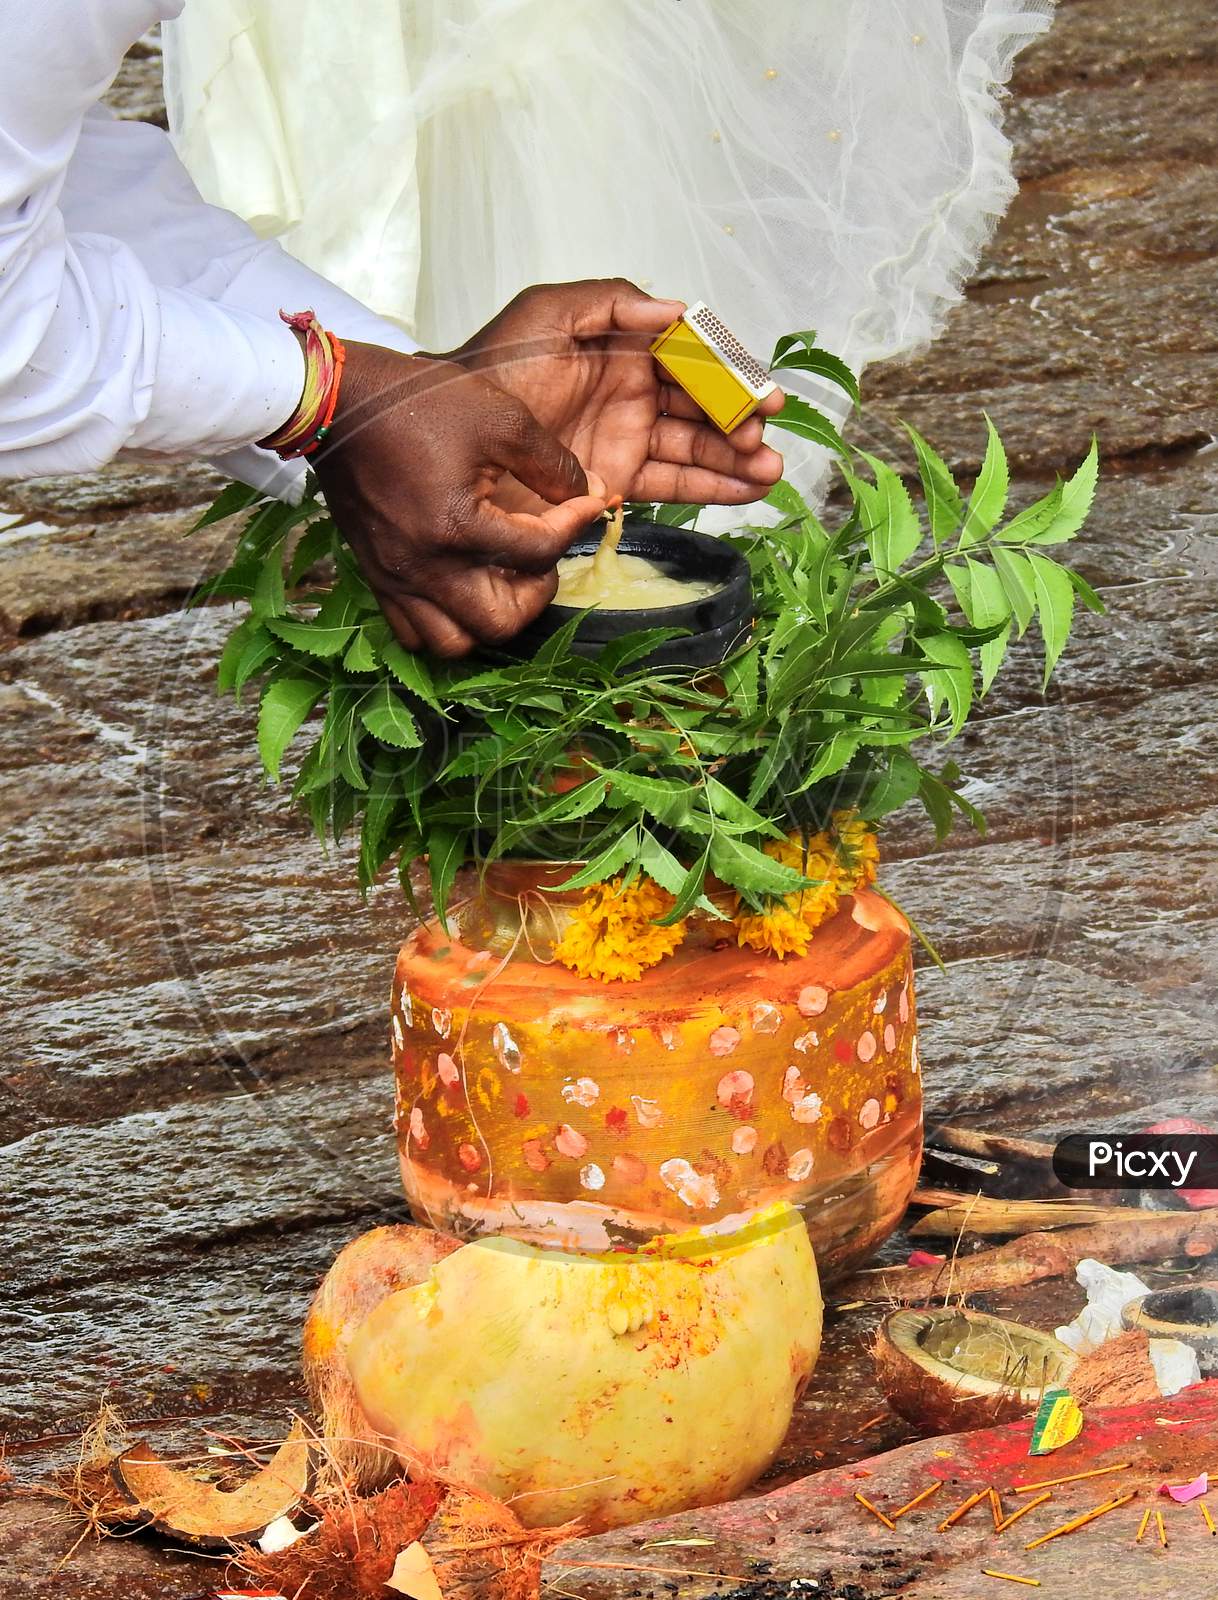 Ndian Hindu Man Lighting The Oil Lamp On Bonam, Afood Offering To Goddess Durga During Bonalu Festival,On The Way To Temple